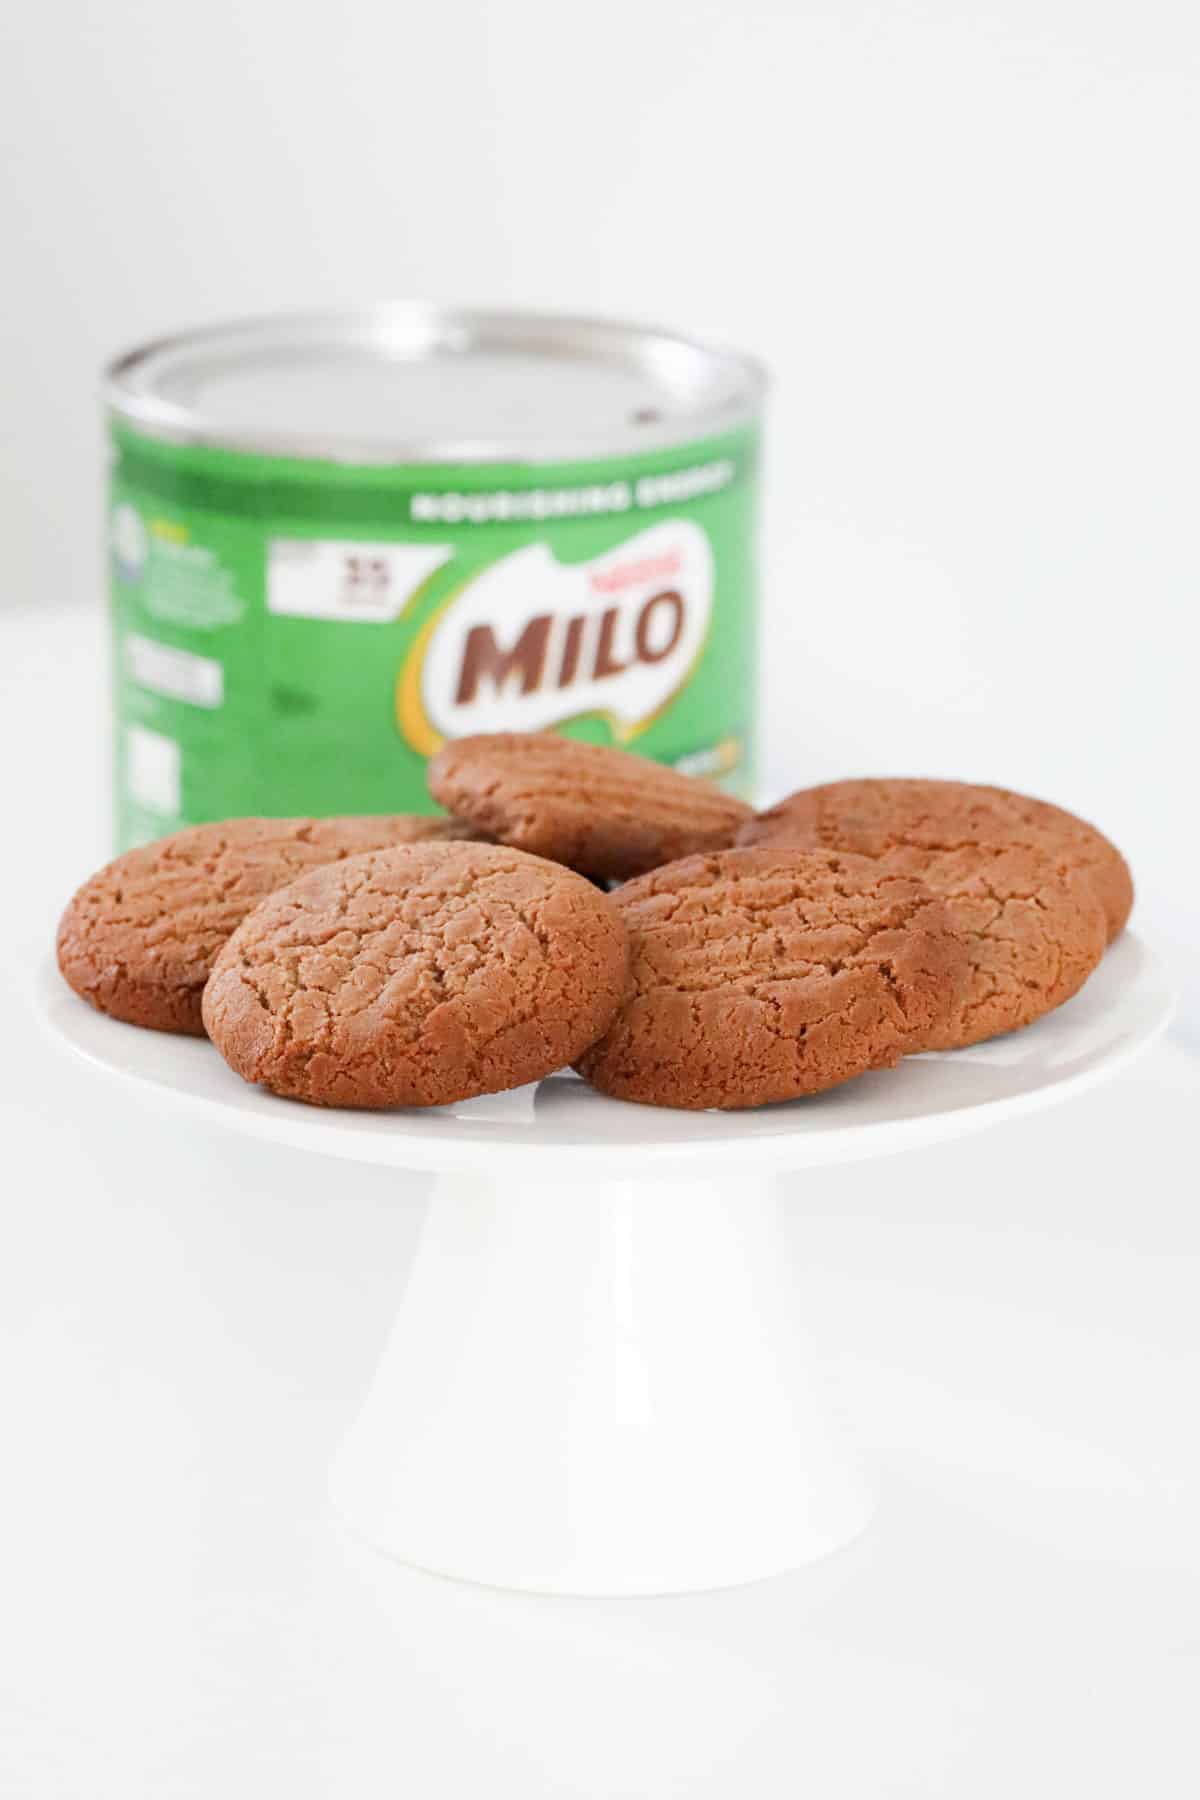 A Milo tin in the background of a plate of bicsuits.